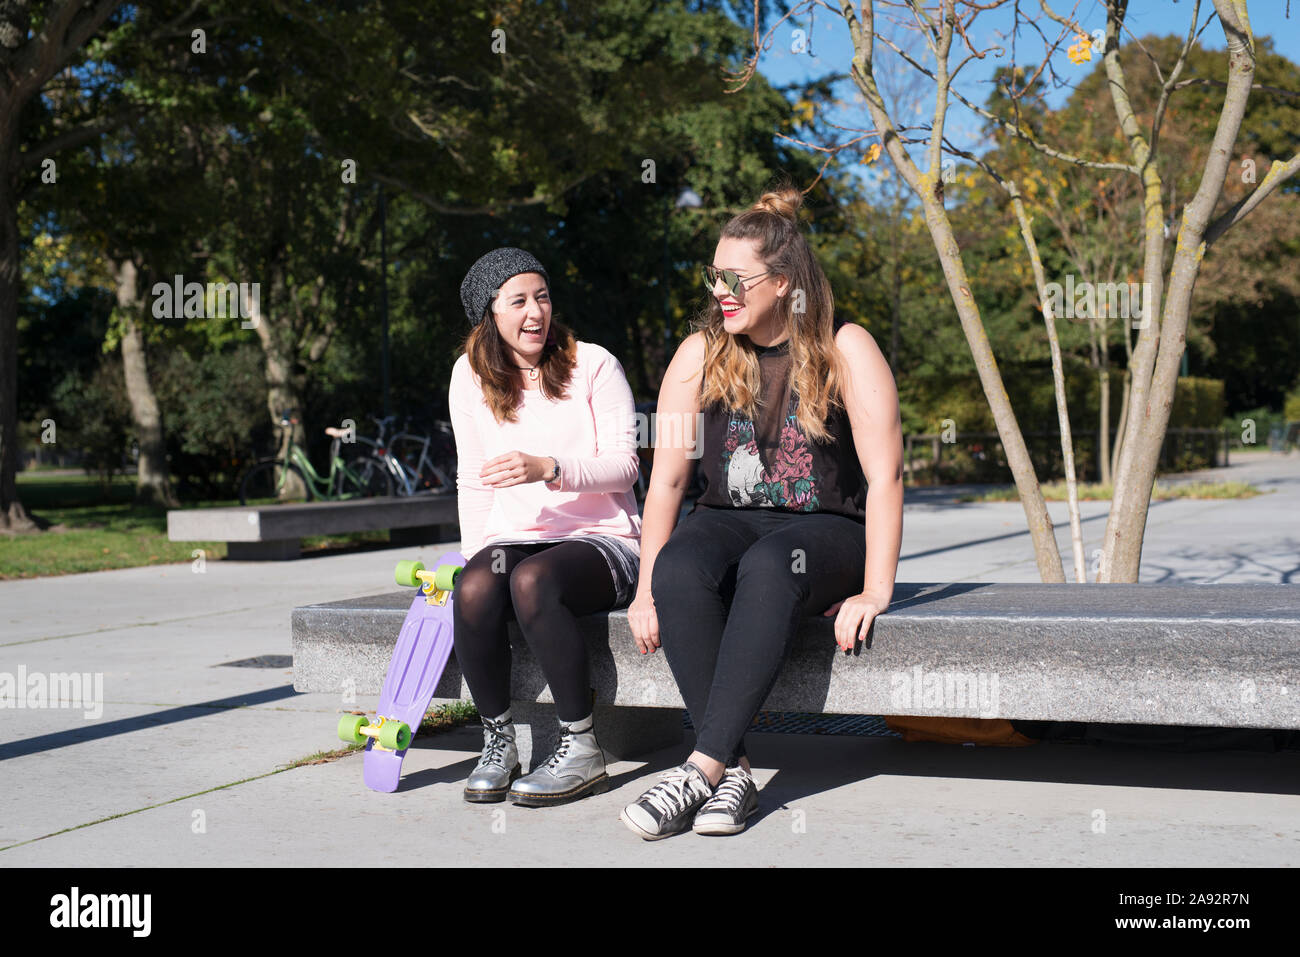 Female friends sitting on bench Stock Photo